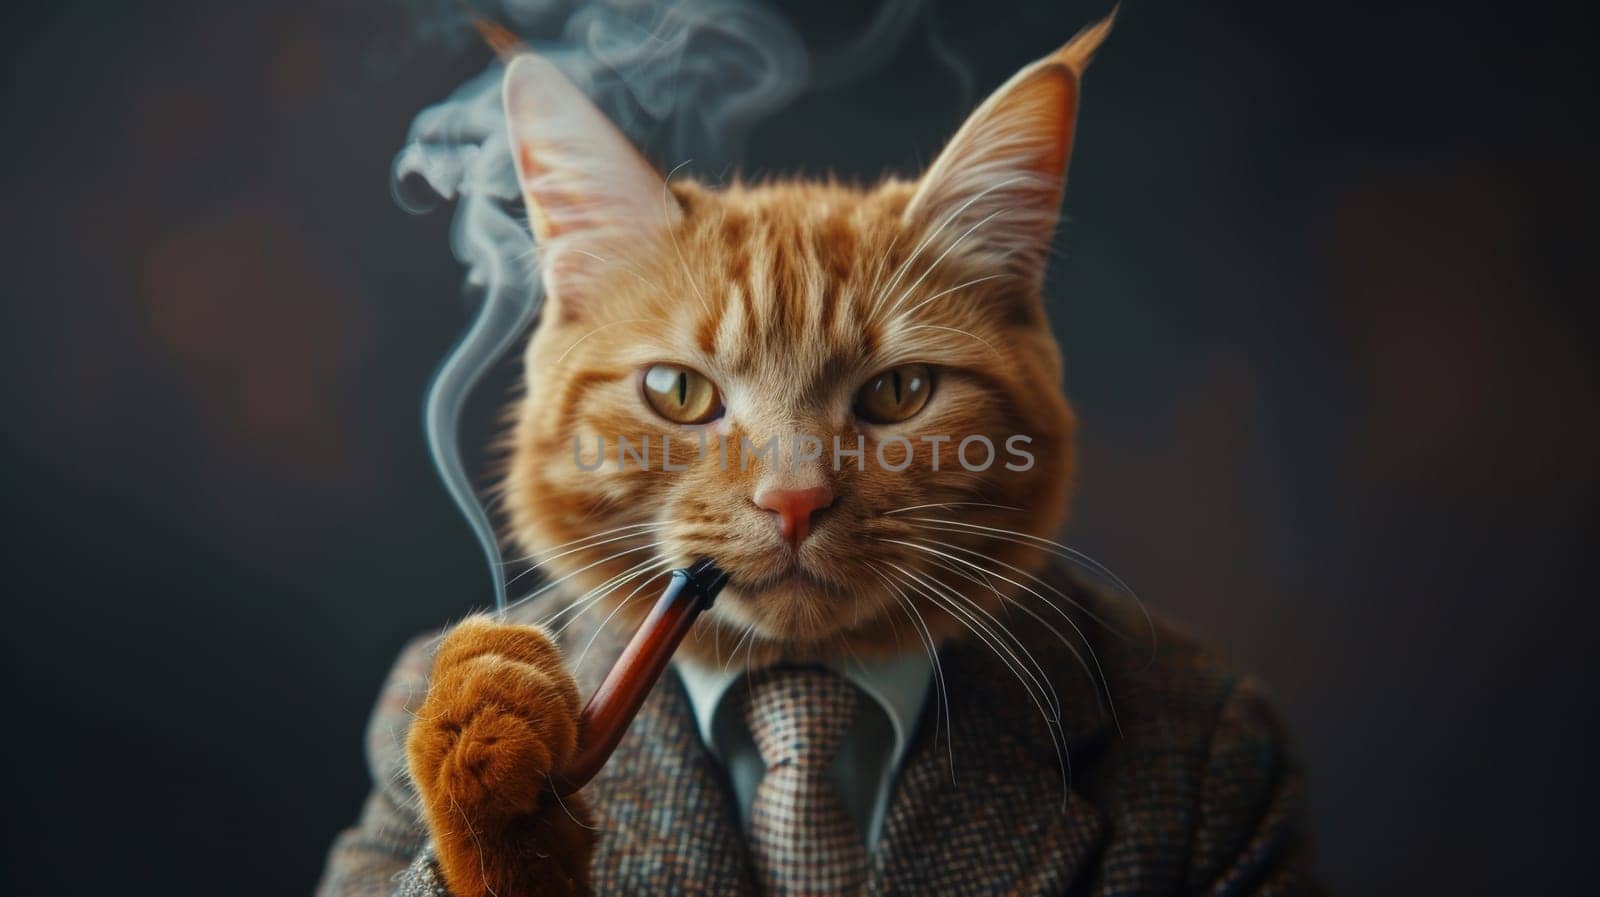 A cat in a suit smoking and holding a cigar